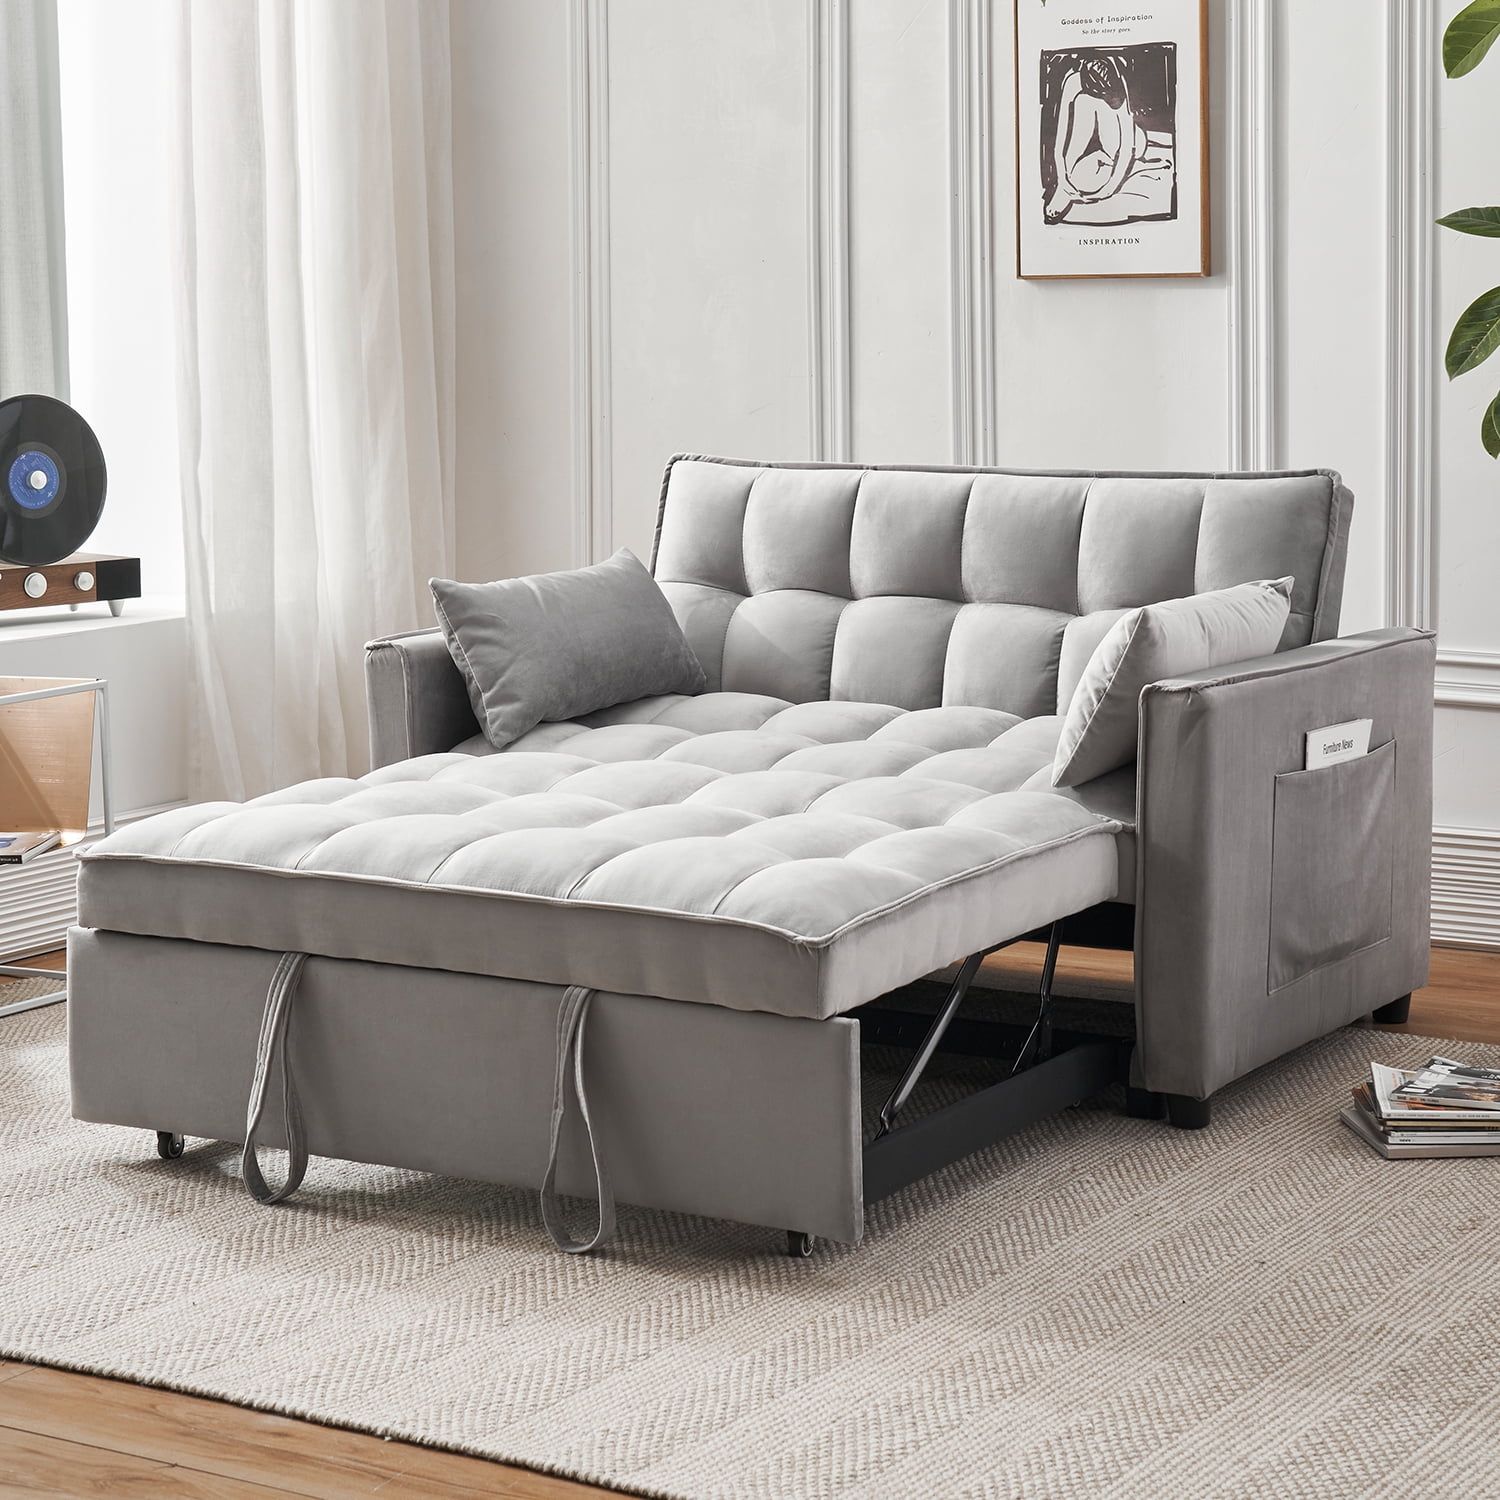 Tzicr 55.5'' 3 In 1 Convertible Sleeper Sofa Bed, Modern Velvet Loveseat  Futon Couch Pullout Bed With Adjustable Backrest, Side Storage Pockets And  Pillows (View 14 of 15)